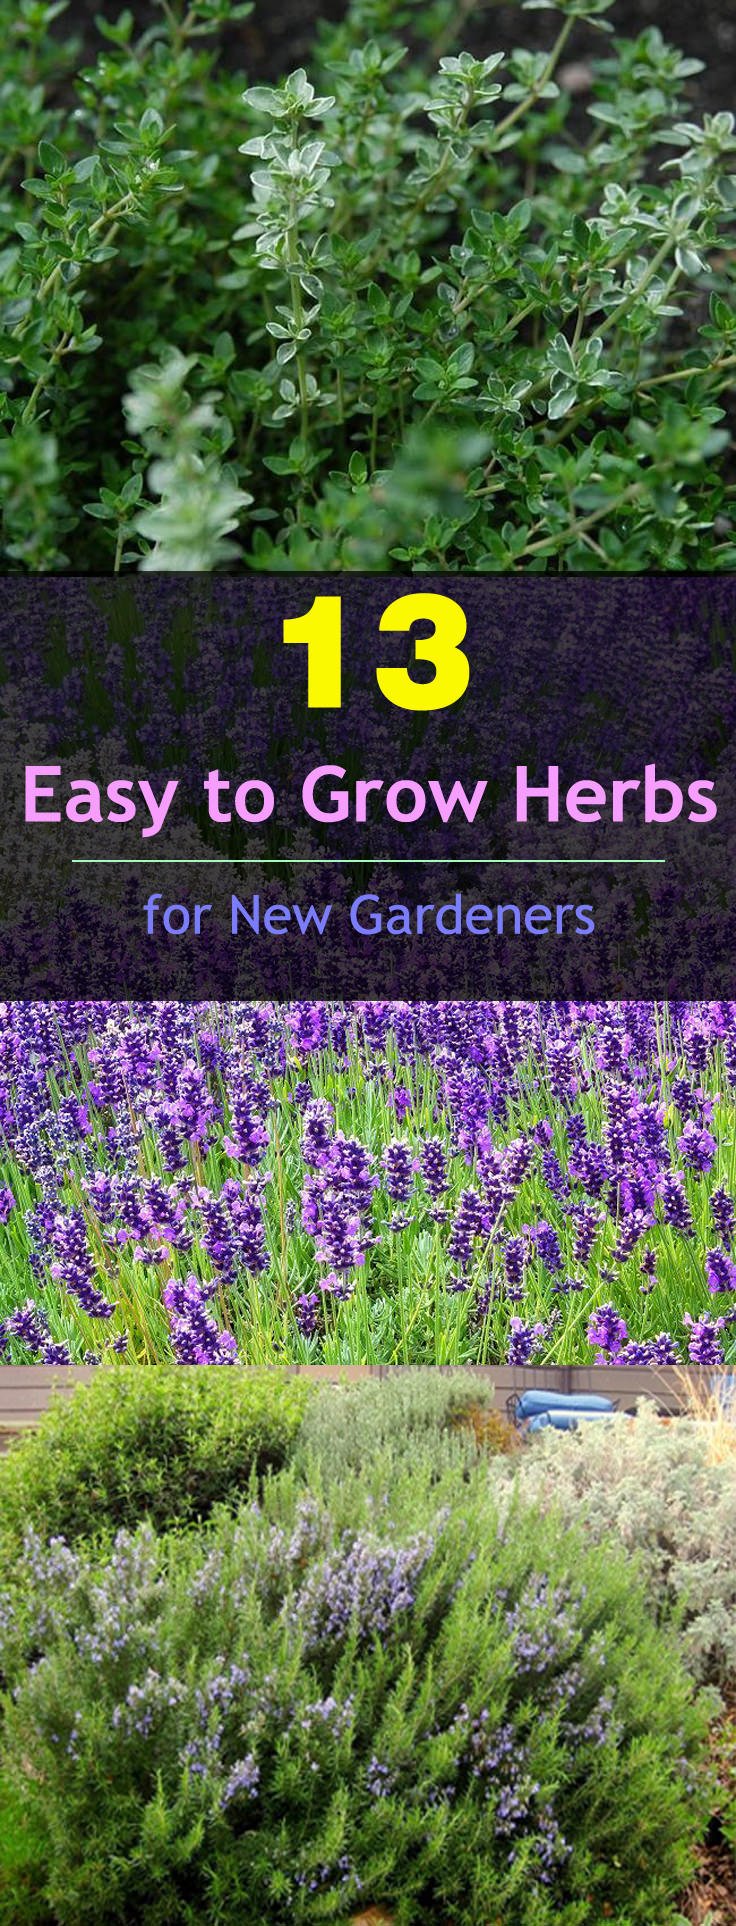 If you're new to gardening and planning to grow herbs then check out these 13 easy to grow herbs. All of them are low maintenance.